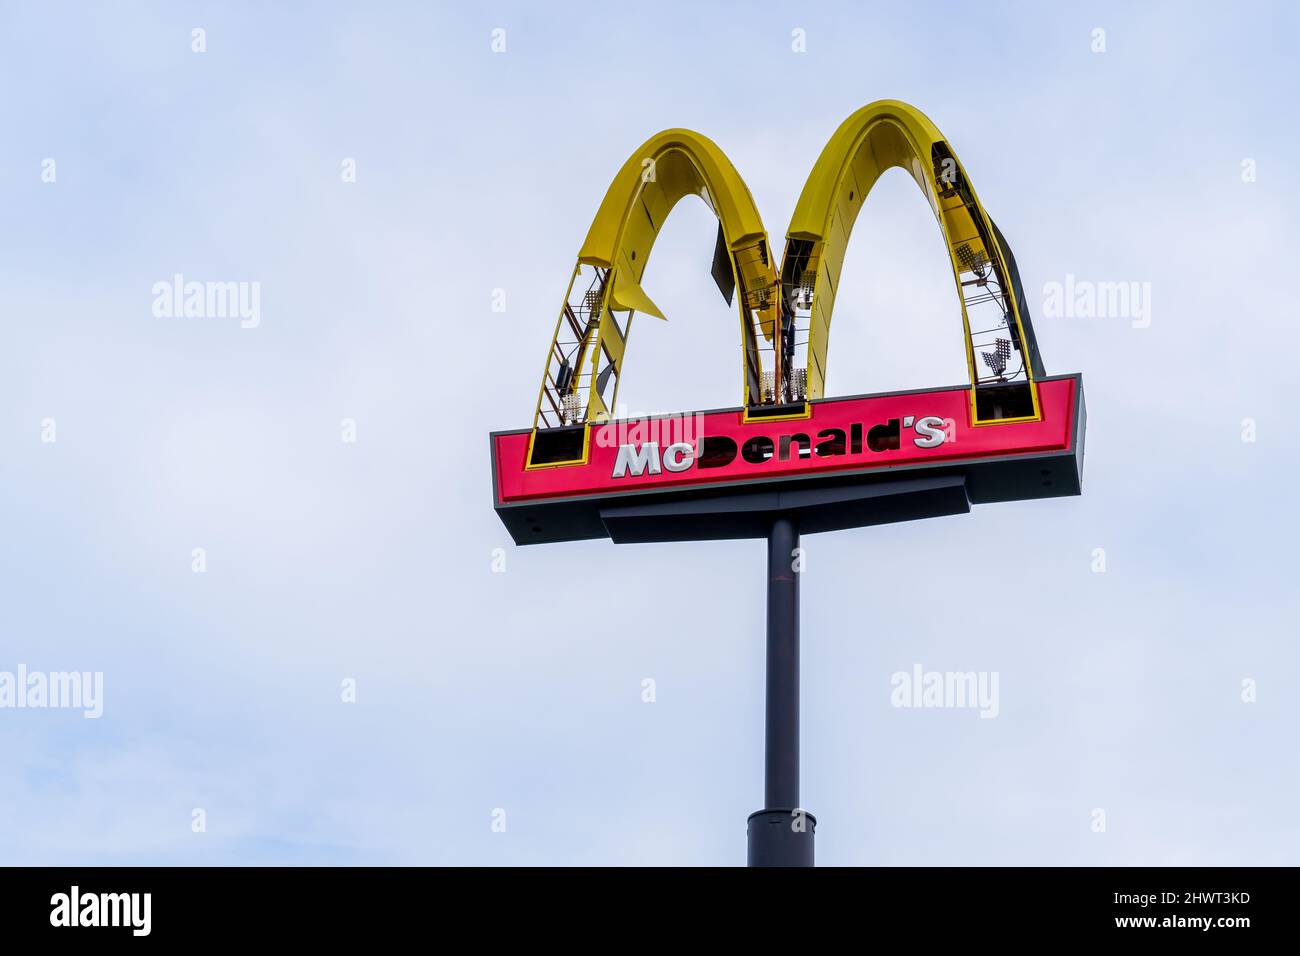 JEFFERSON, LA, USA - MARCH 3, 2022: Wind-ravaged McDonald's sign in New Orleans suburb Stock Photo